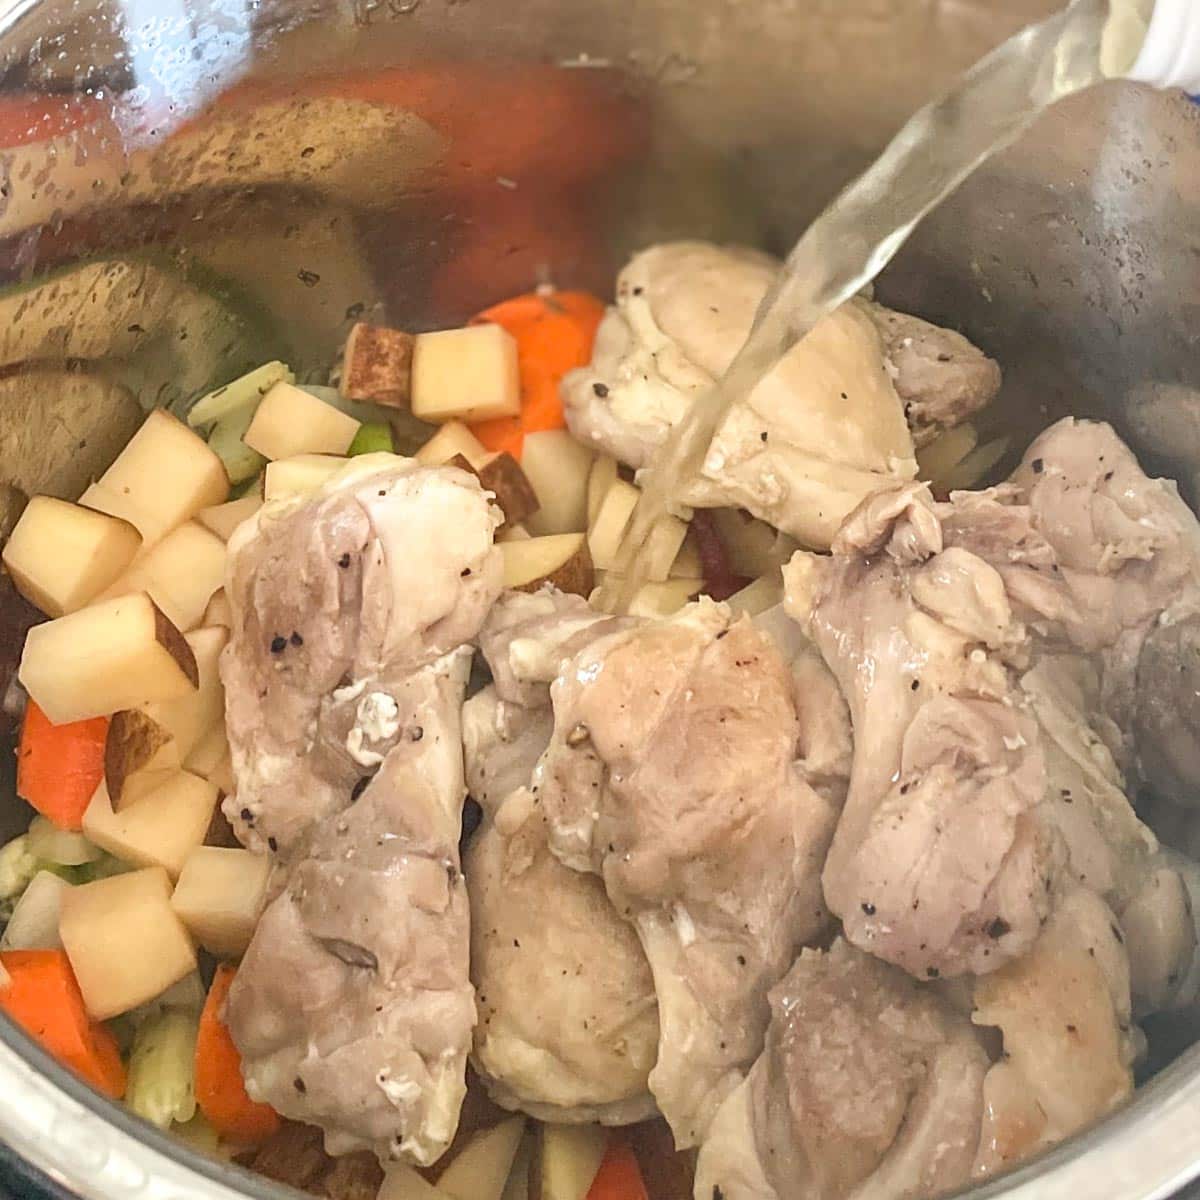 Broth is added to the stew.